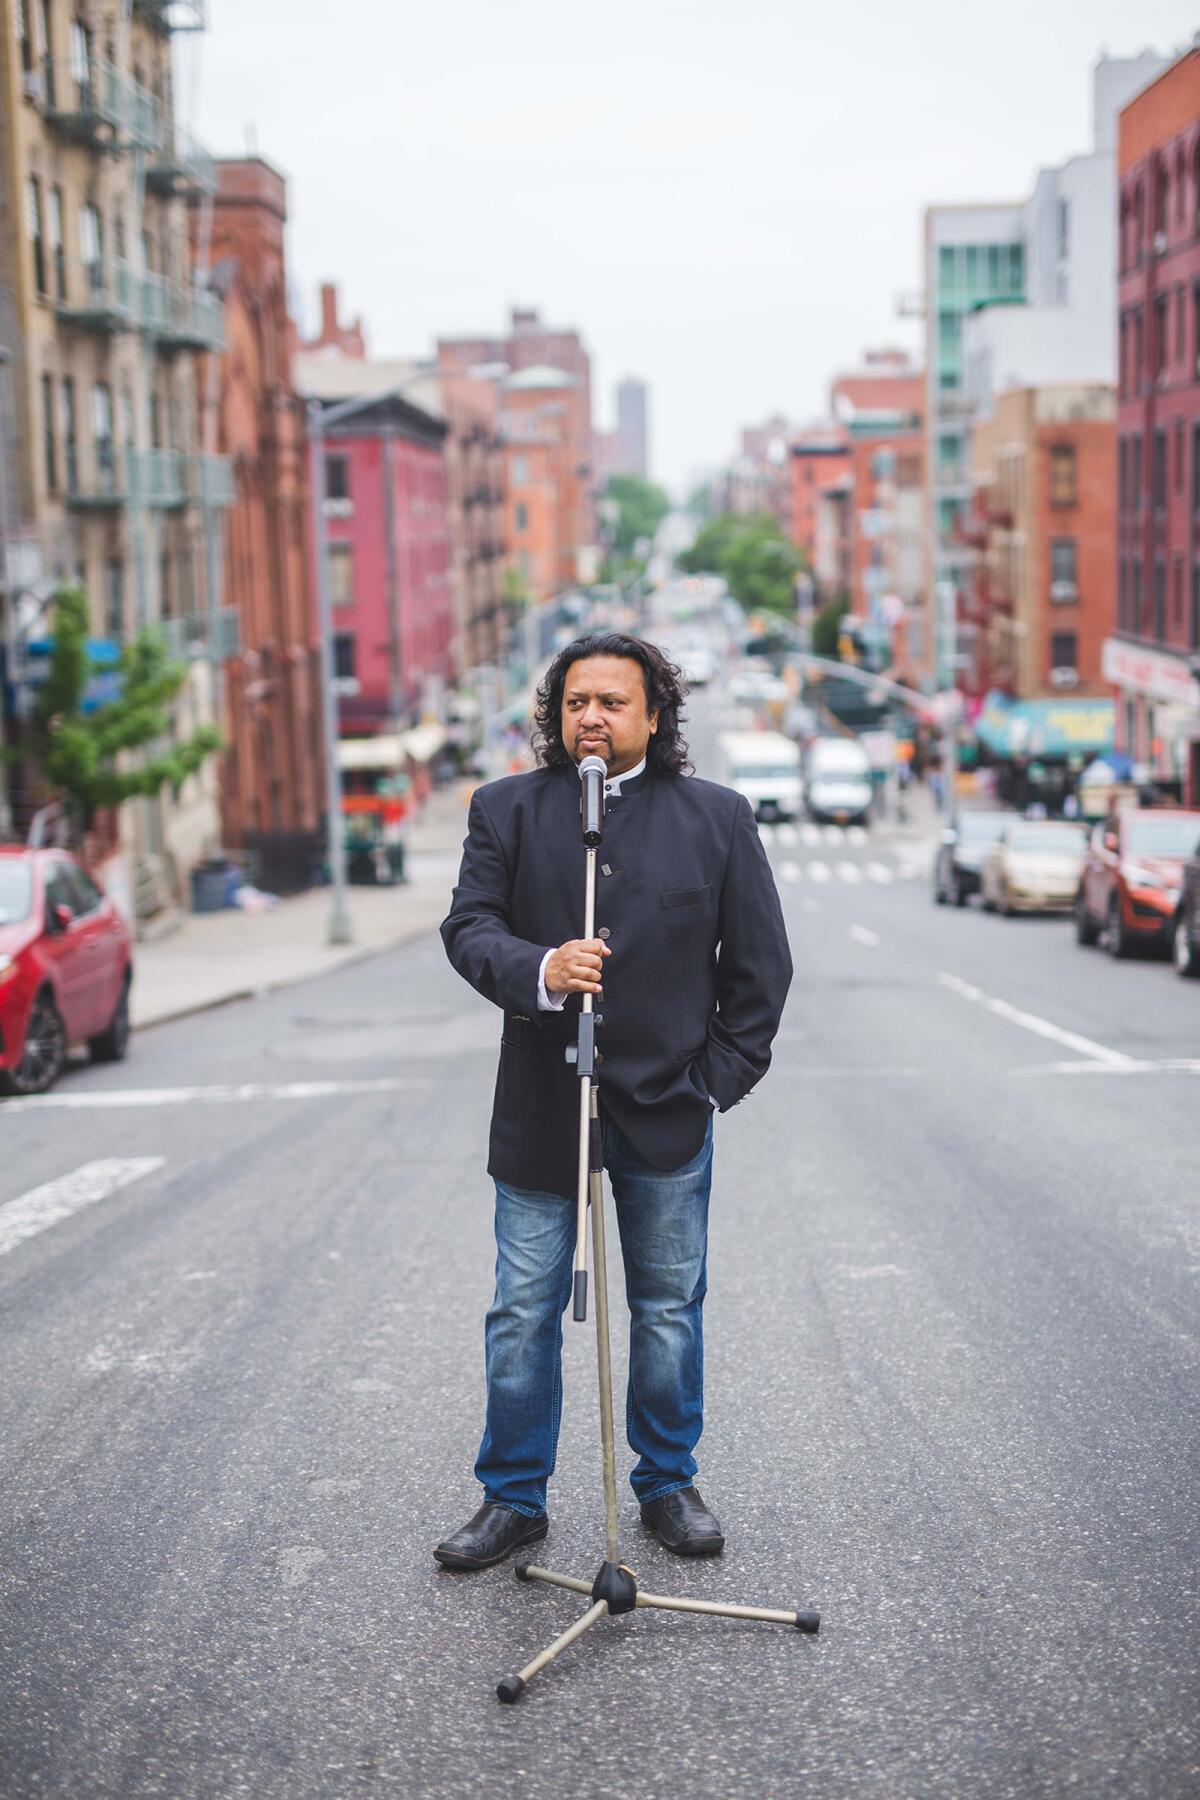 Comedian-playwright Alaudin Ullah stands on a city street.